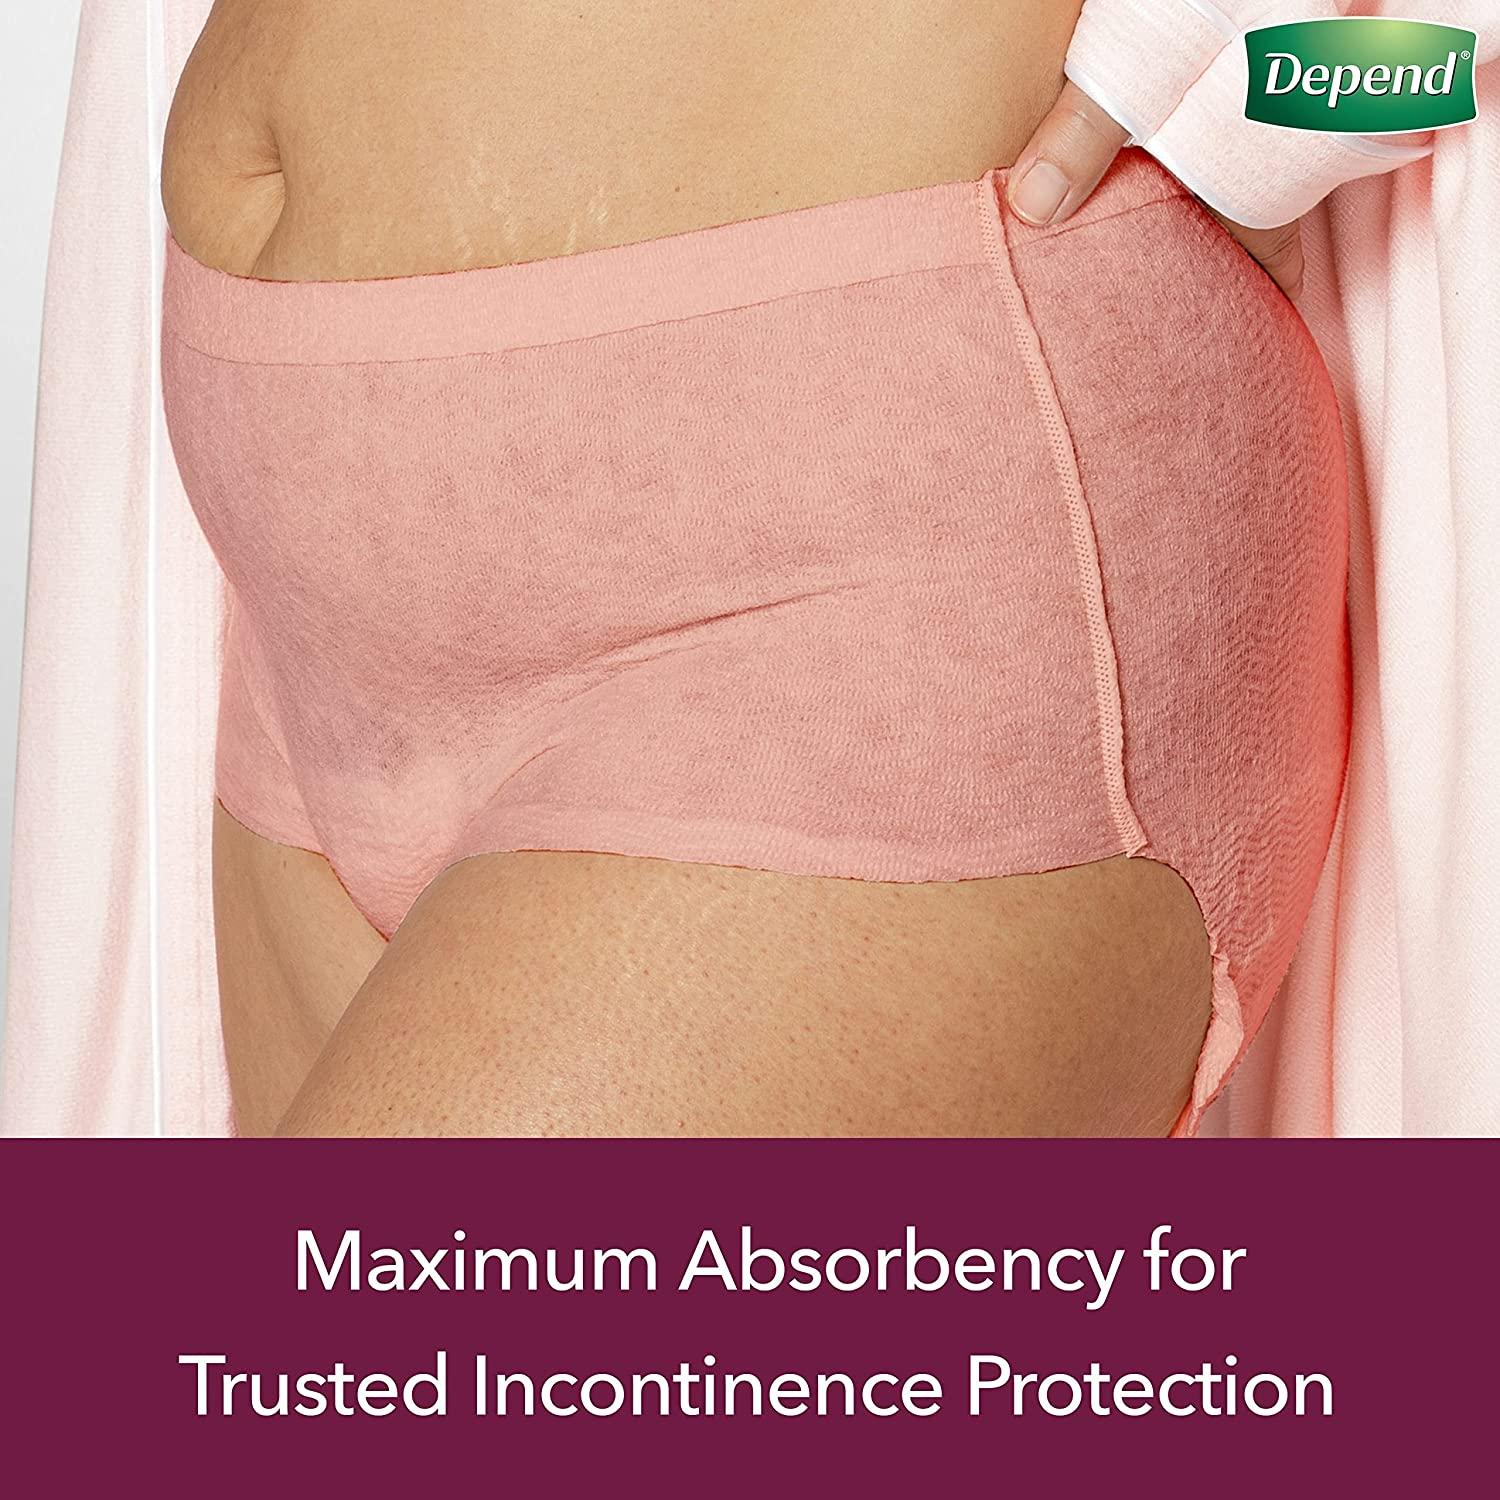 Depend Silhouette Adult Incontinence And Postpartum Underwear For